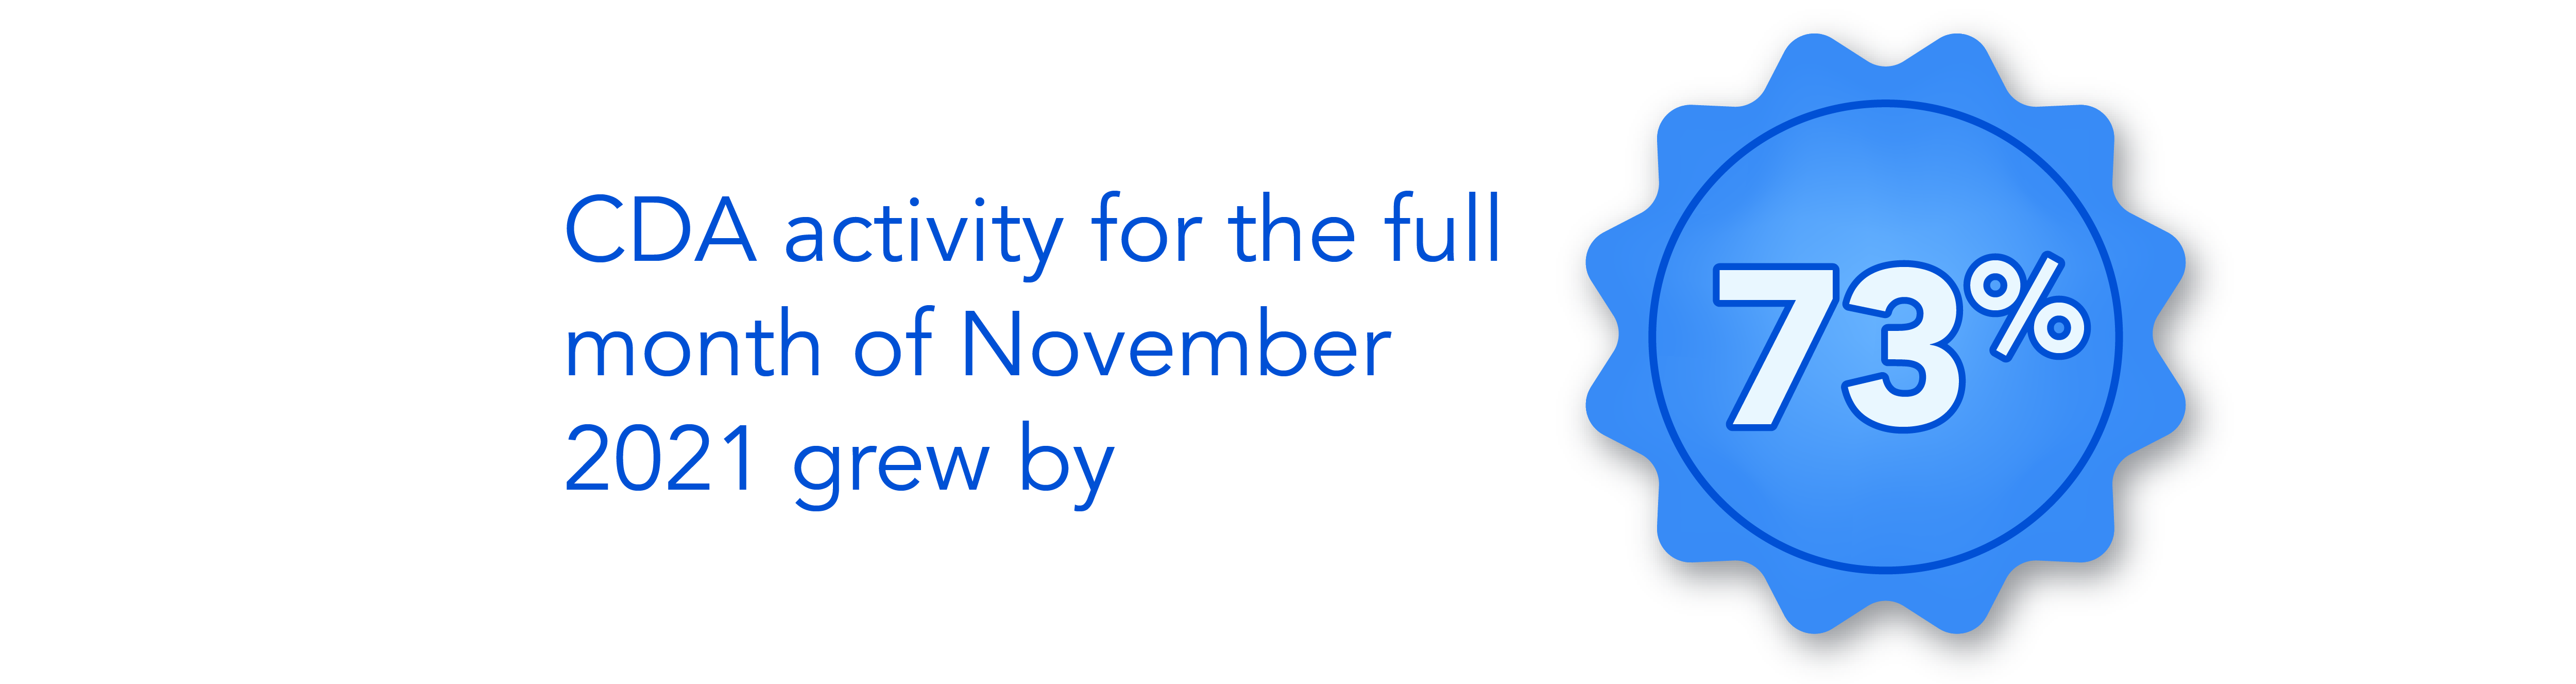 Content Delivery API activity for the full month of November 2021 grew by 73%